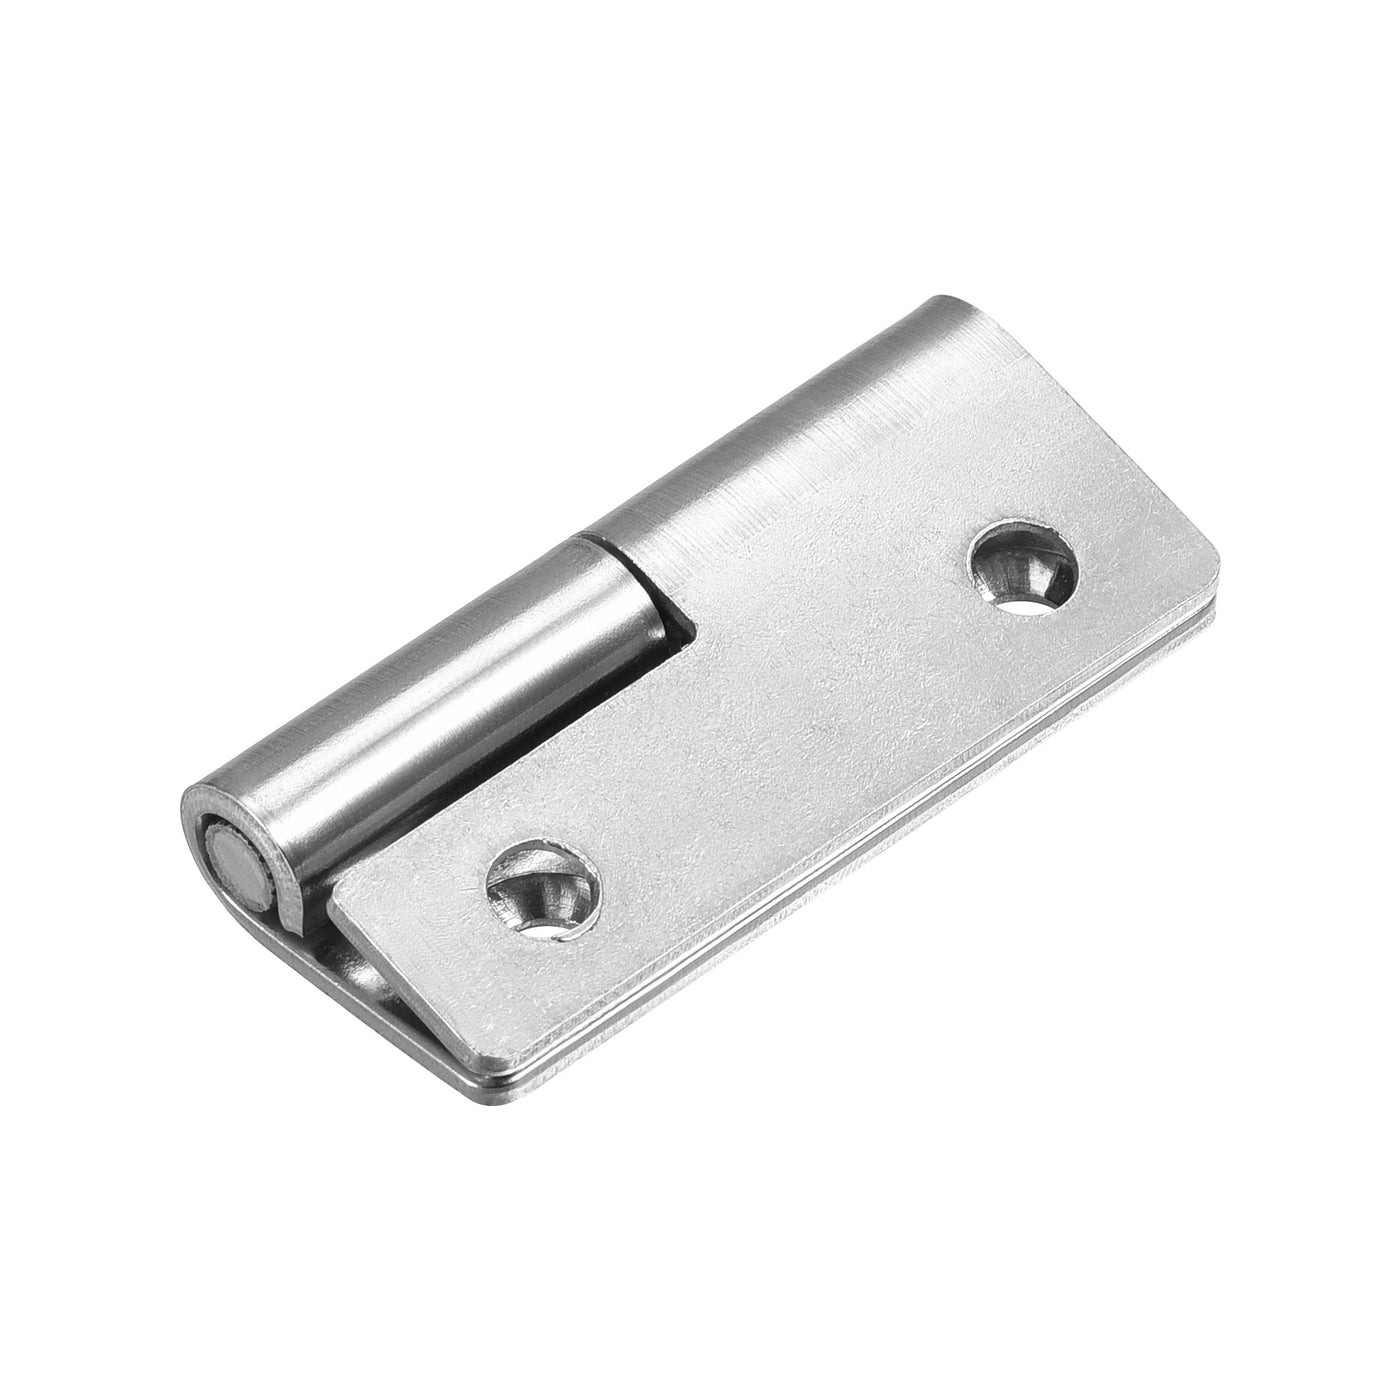 uxcell Uxcell Lift Off Hinge , Right Handedness Mini Stainless Steel Hinge Detachable Slip Joint Small Flag Hinges 50mm Long 36mm Open Width 2pcs